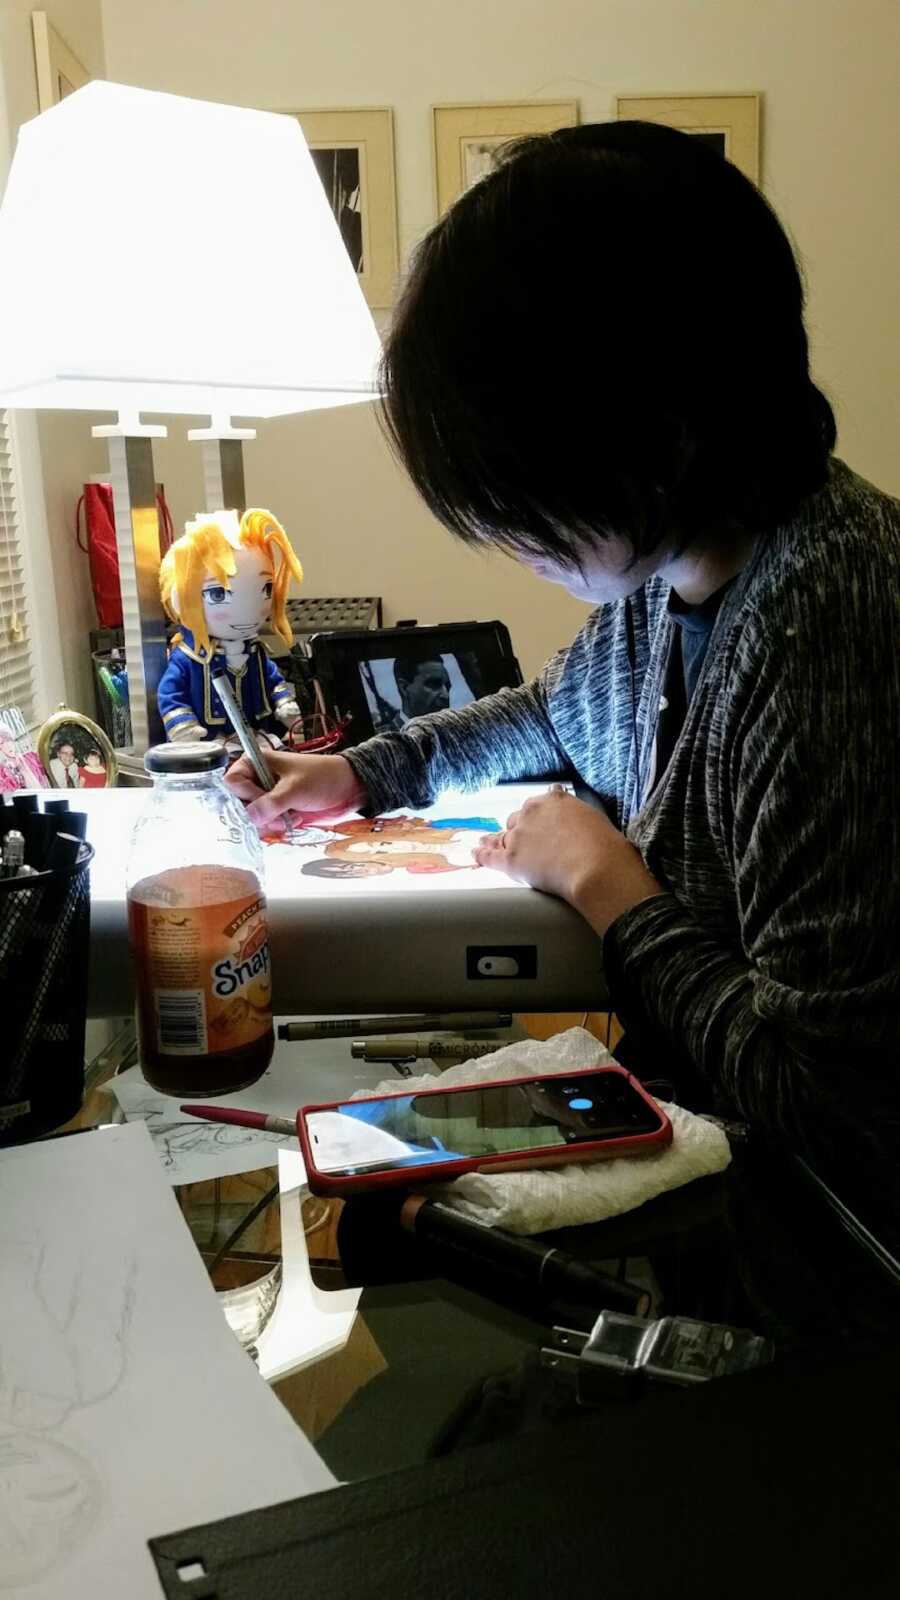 Young woman working on a drawing at a cluttered desk